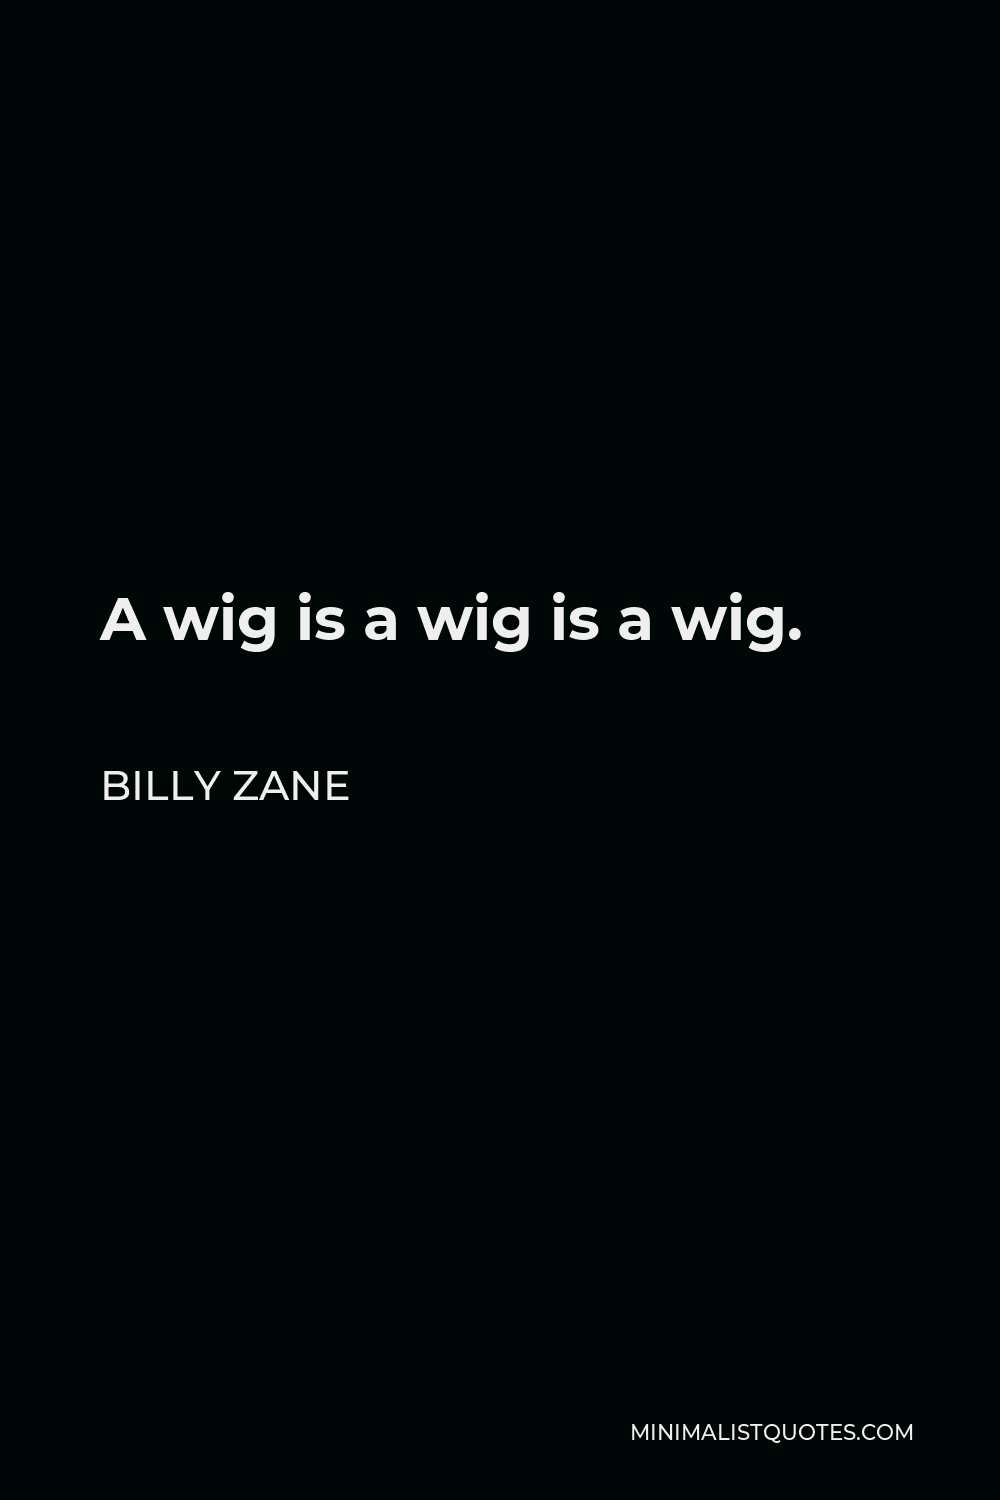 Billy Zane Quote - A wig is a wig is a wig.